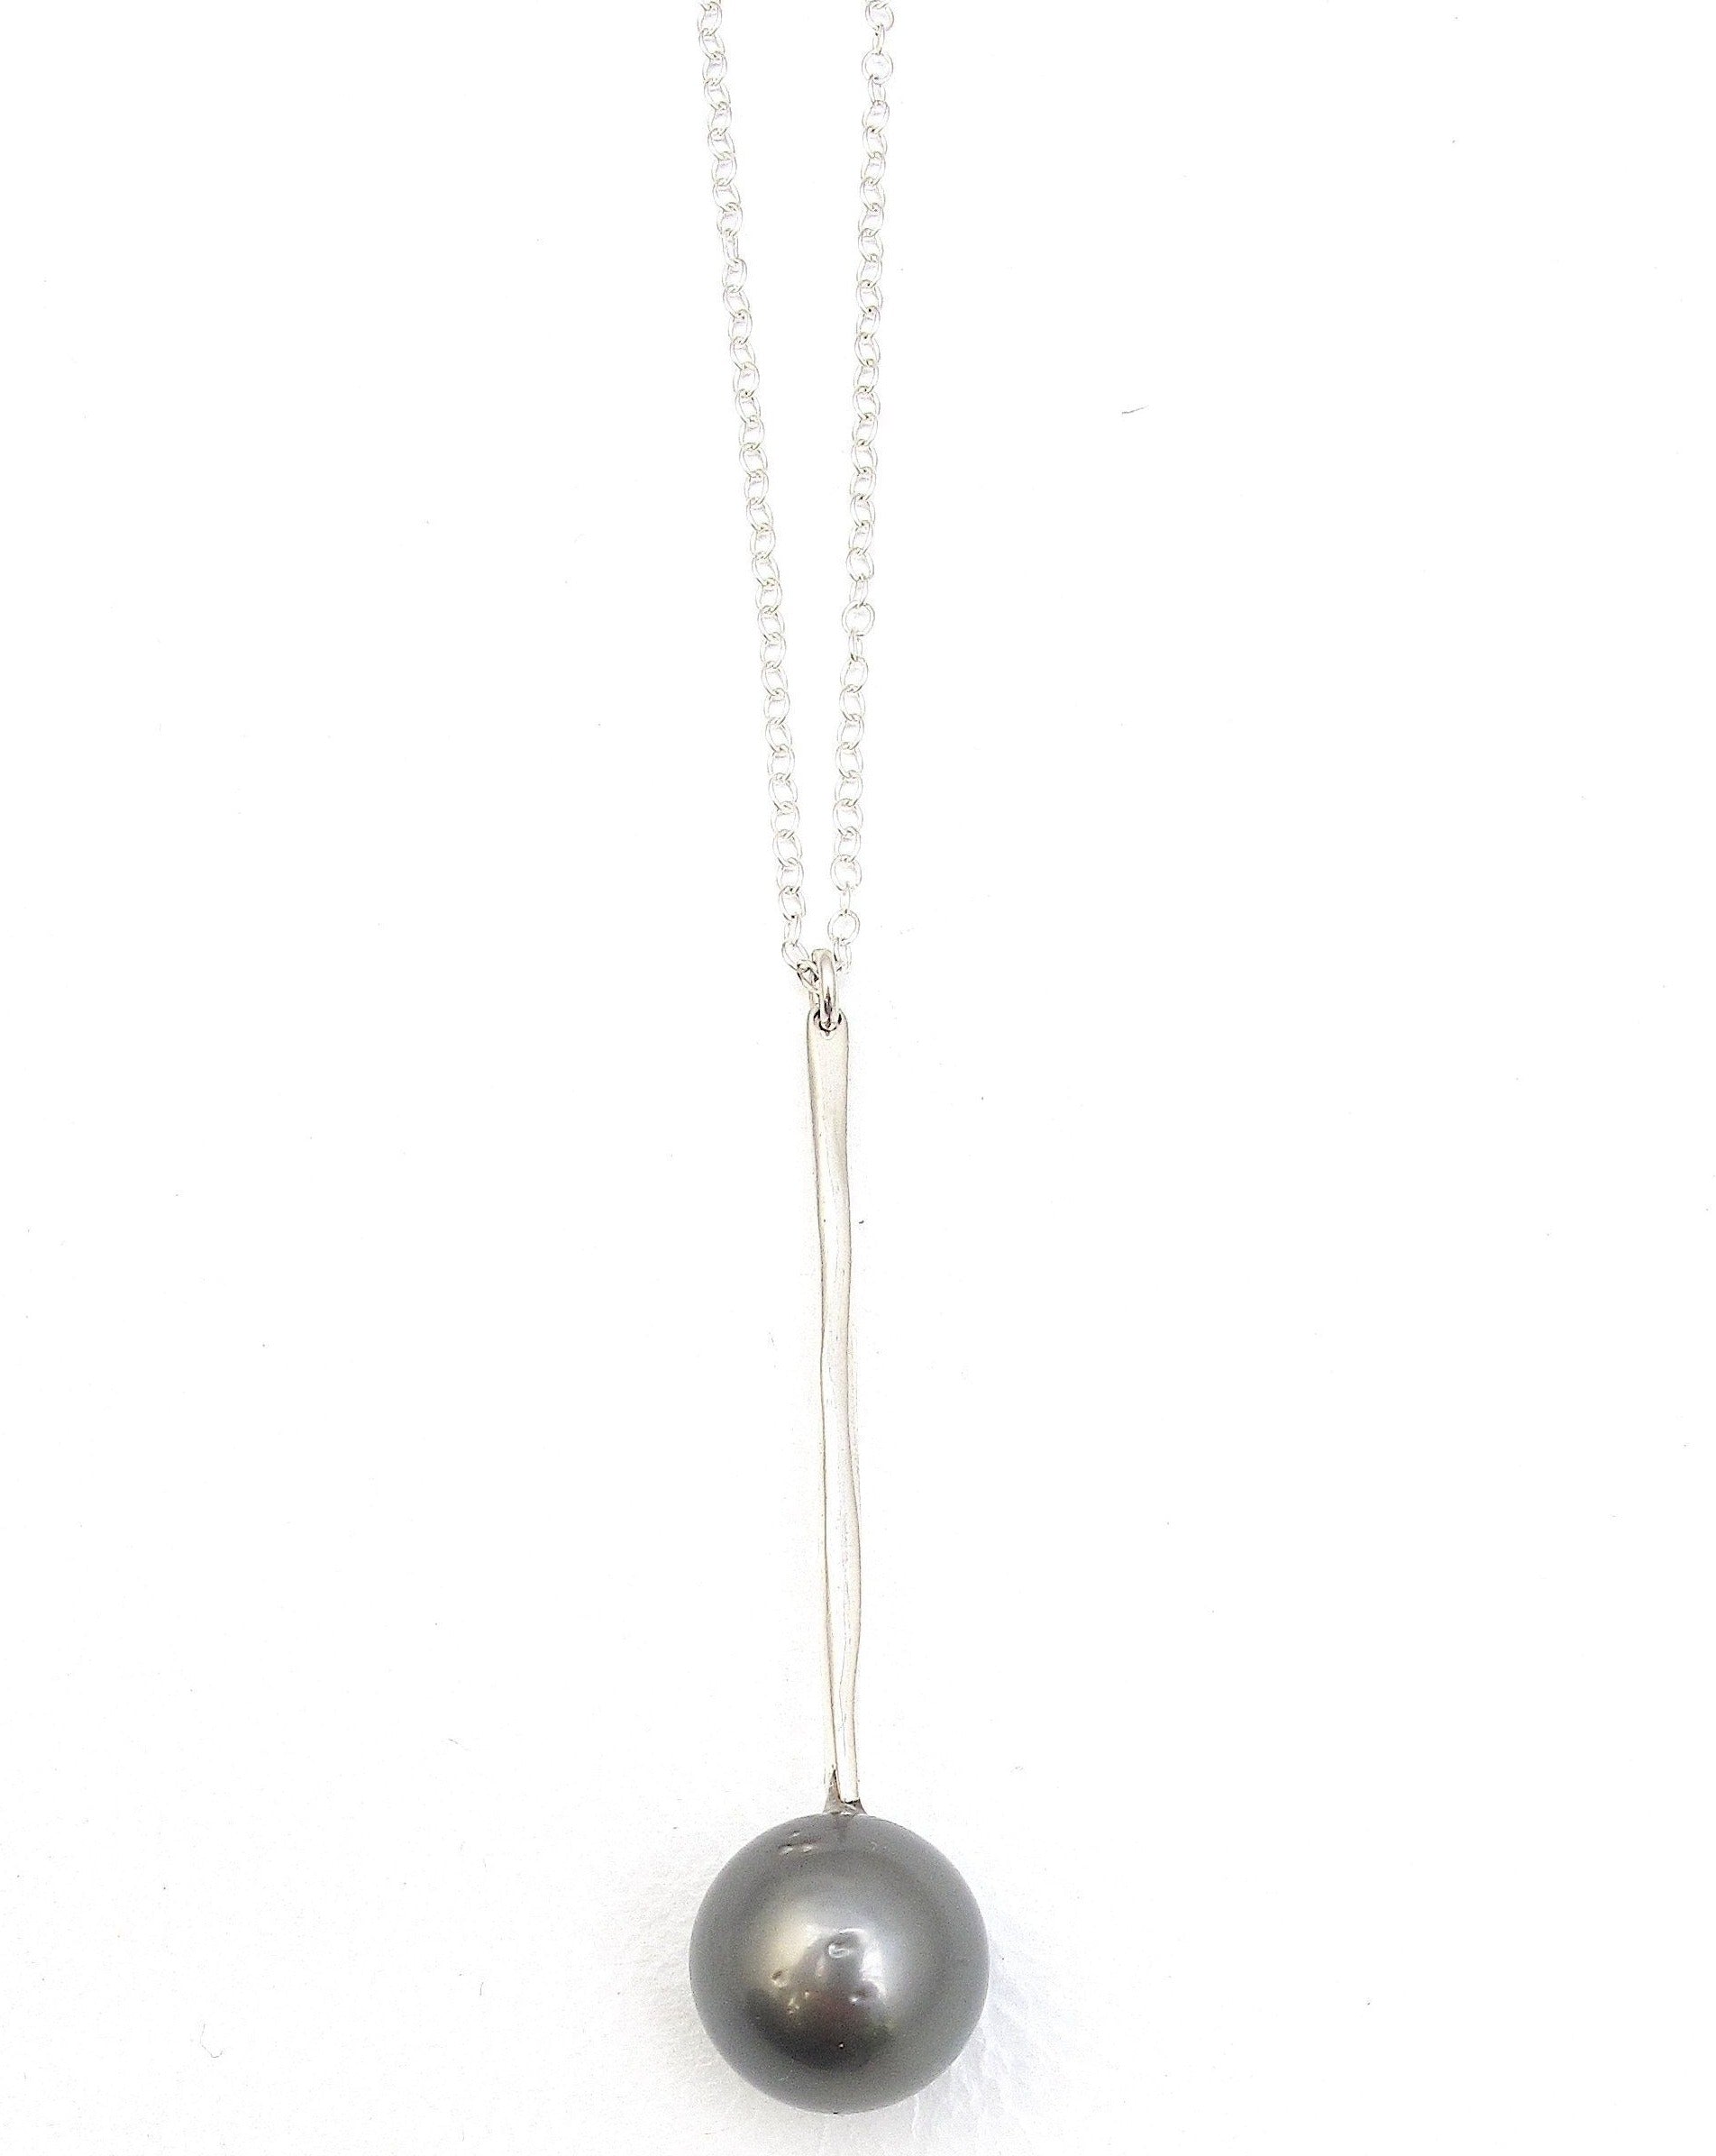 Wand black pearl pendant necklace